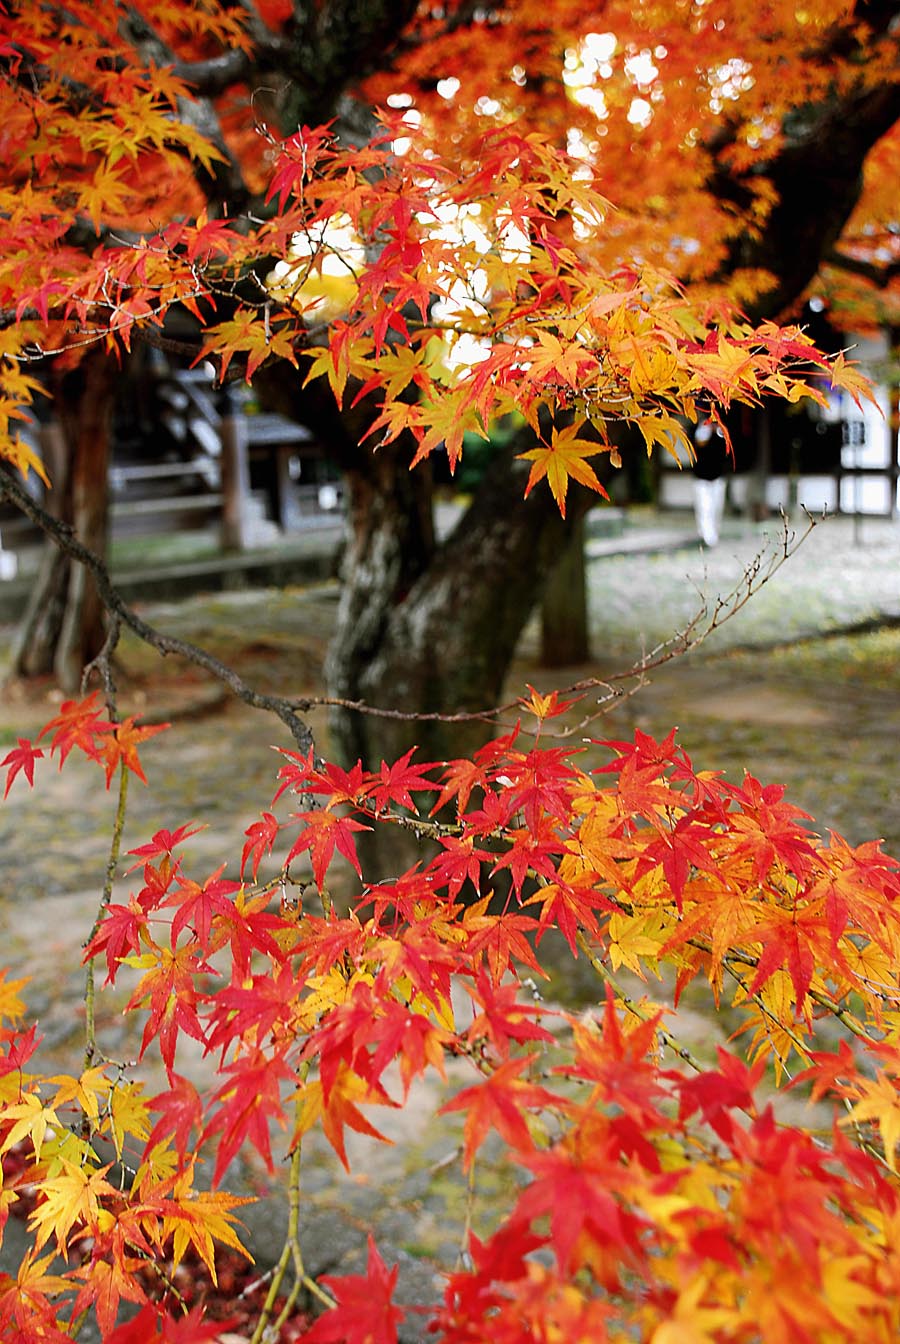 Autumn leaves at Shinnyodo Temple, Kyoto